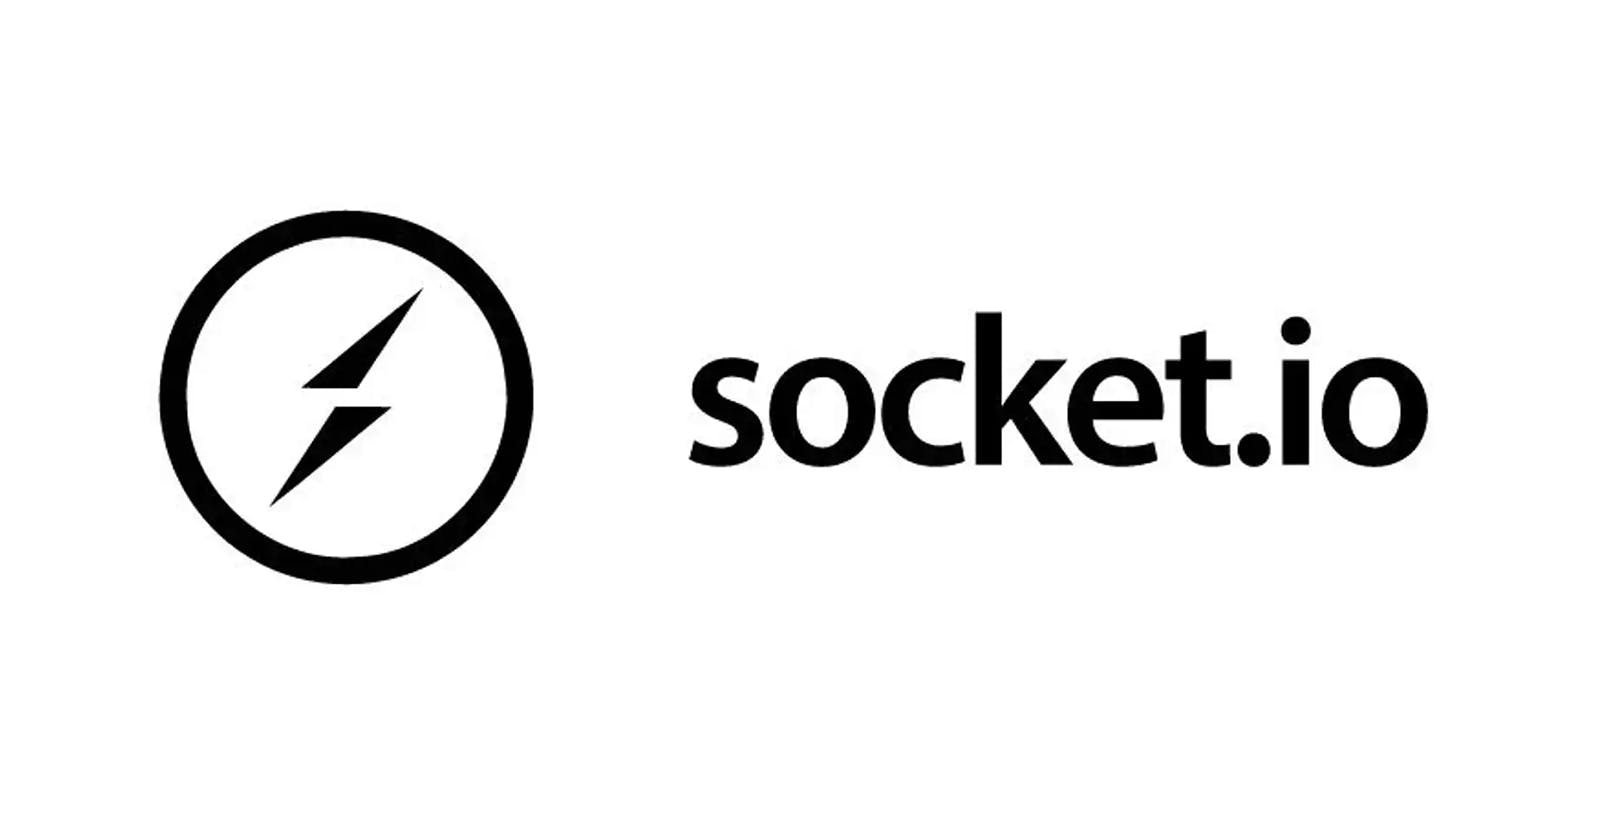 Creating a Real-Time Chat Application with Socket.io: The Ultimate Guide